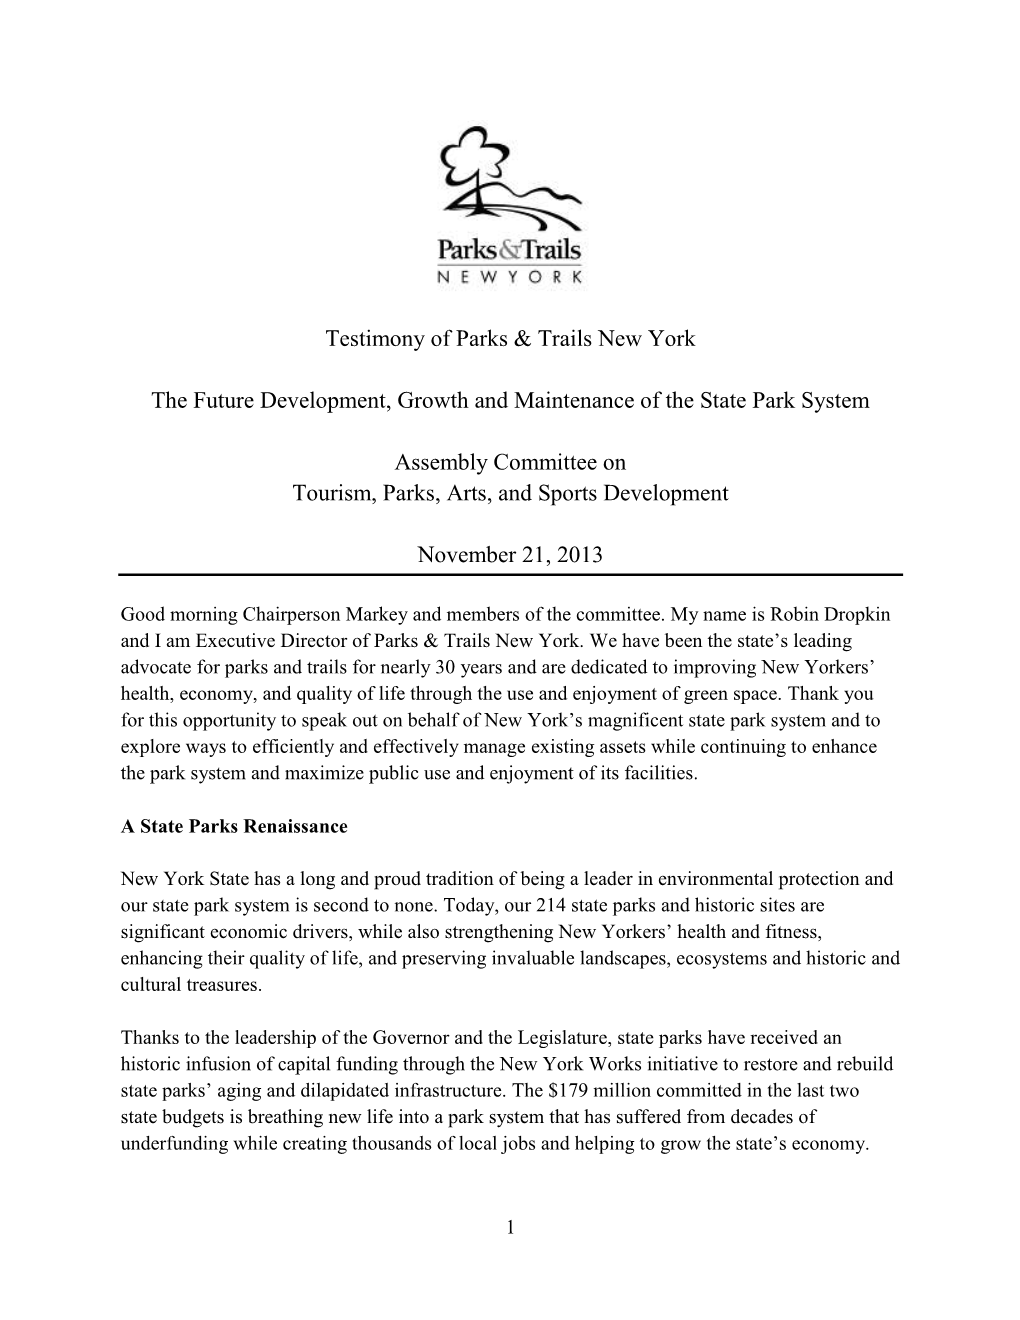 Testimony of Parks & Trails New York the Future Development, Growth